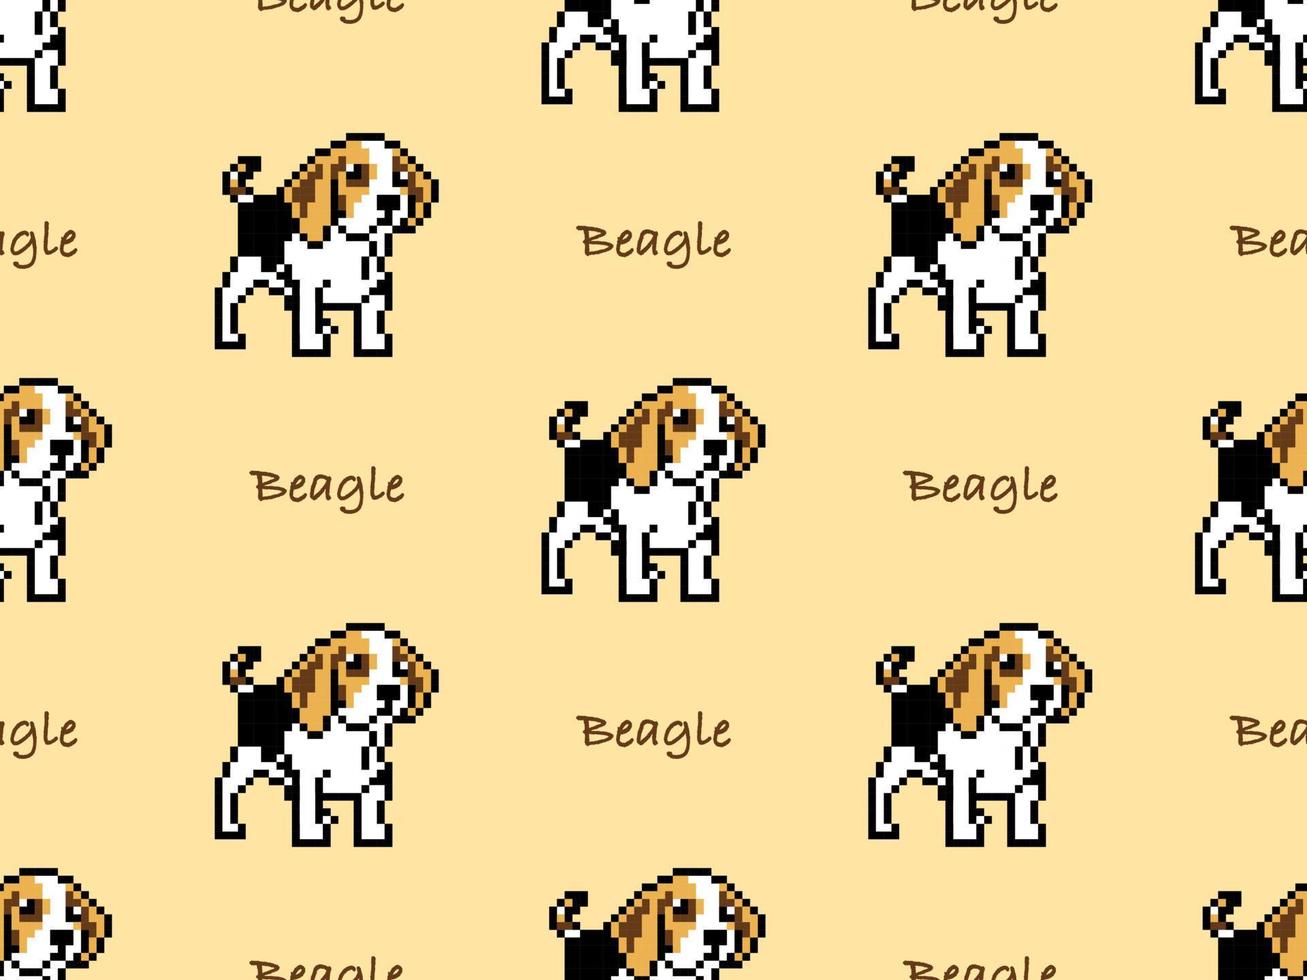 Beagle cartoon character seamless pattern on yellow background. Pixel style vector